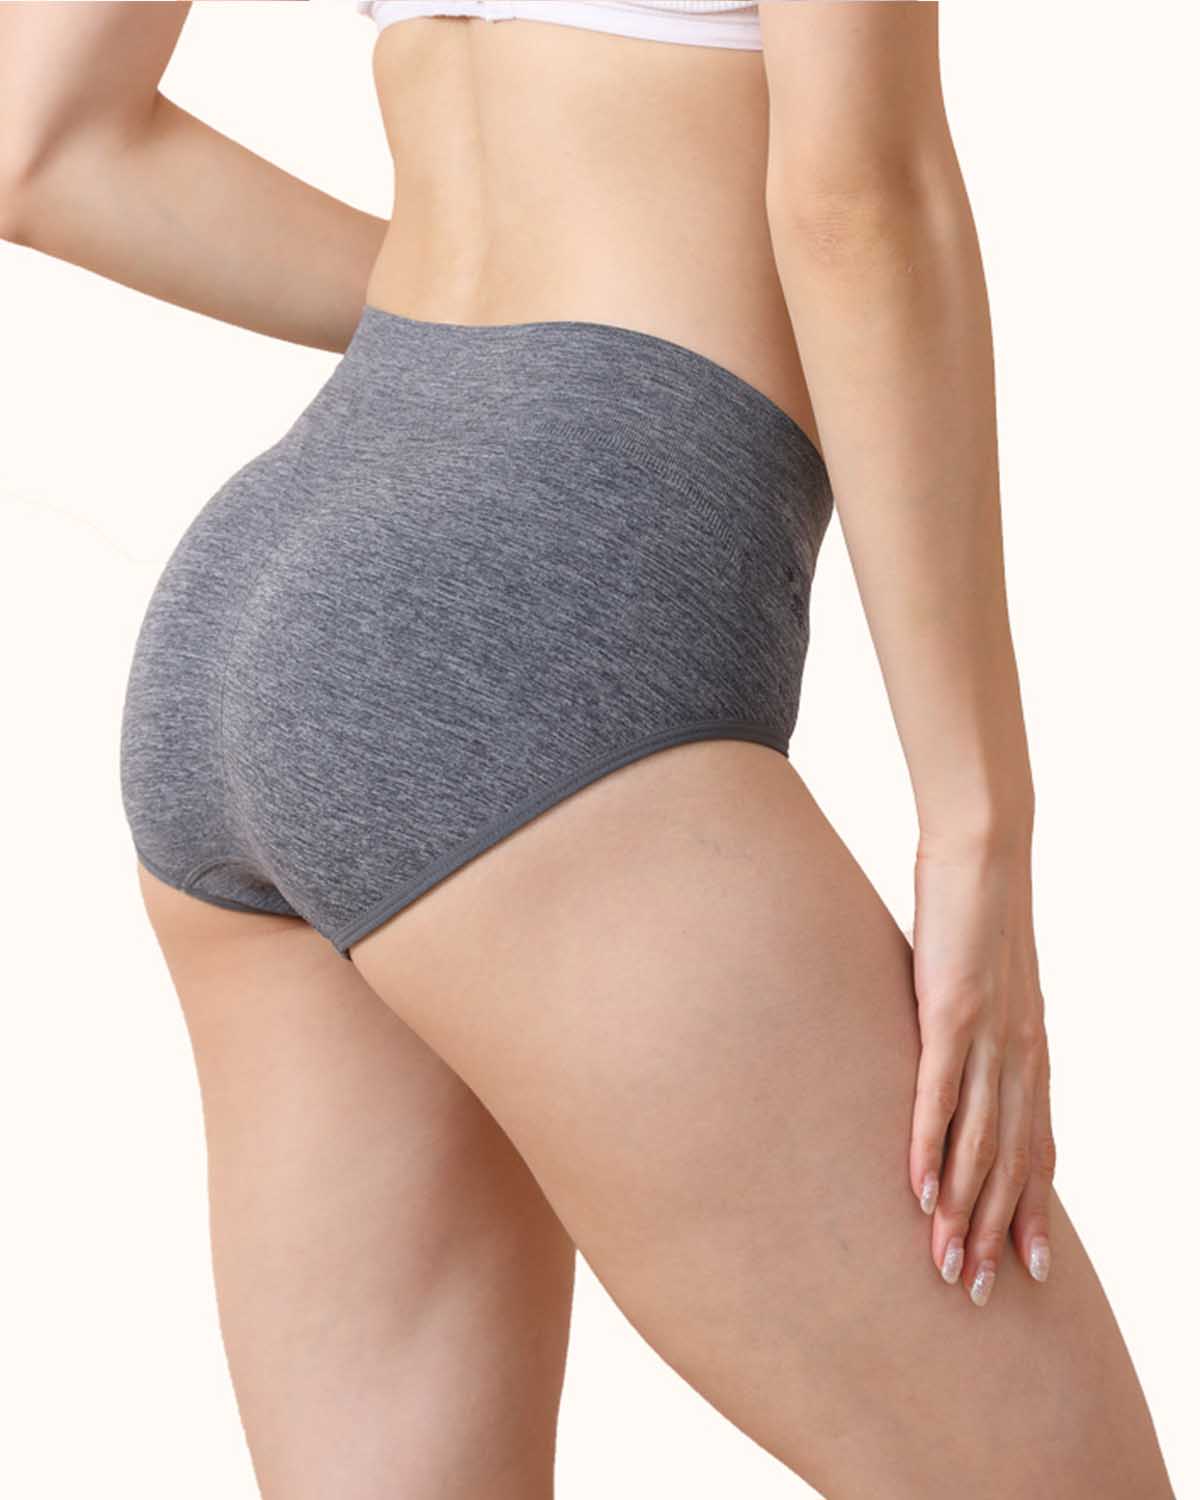 HSIA Patricia Seamless Soft Invisible Stretch Panty - Discreet Style